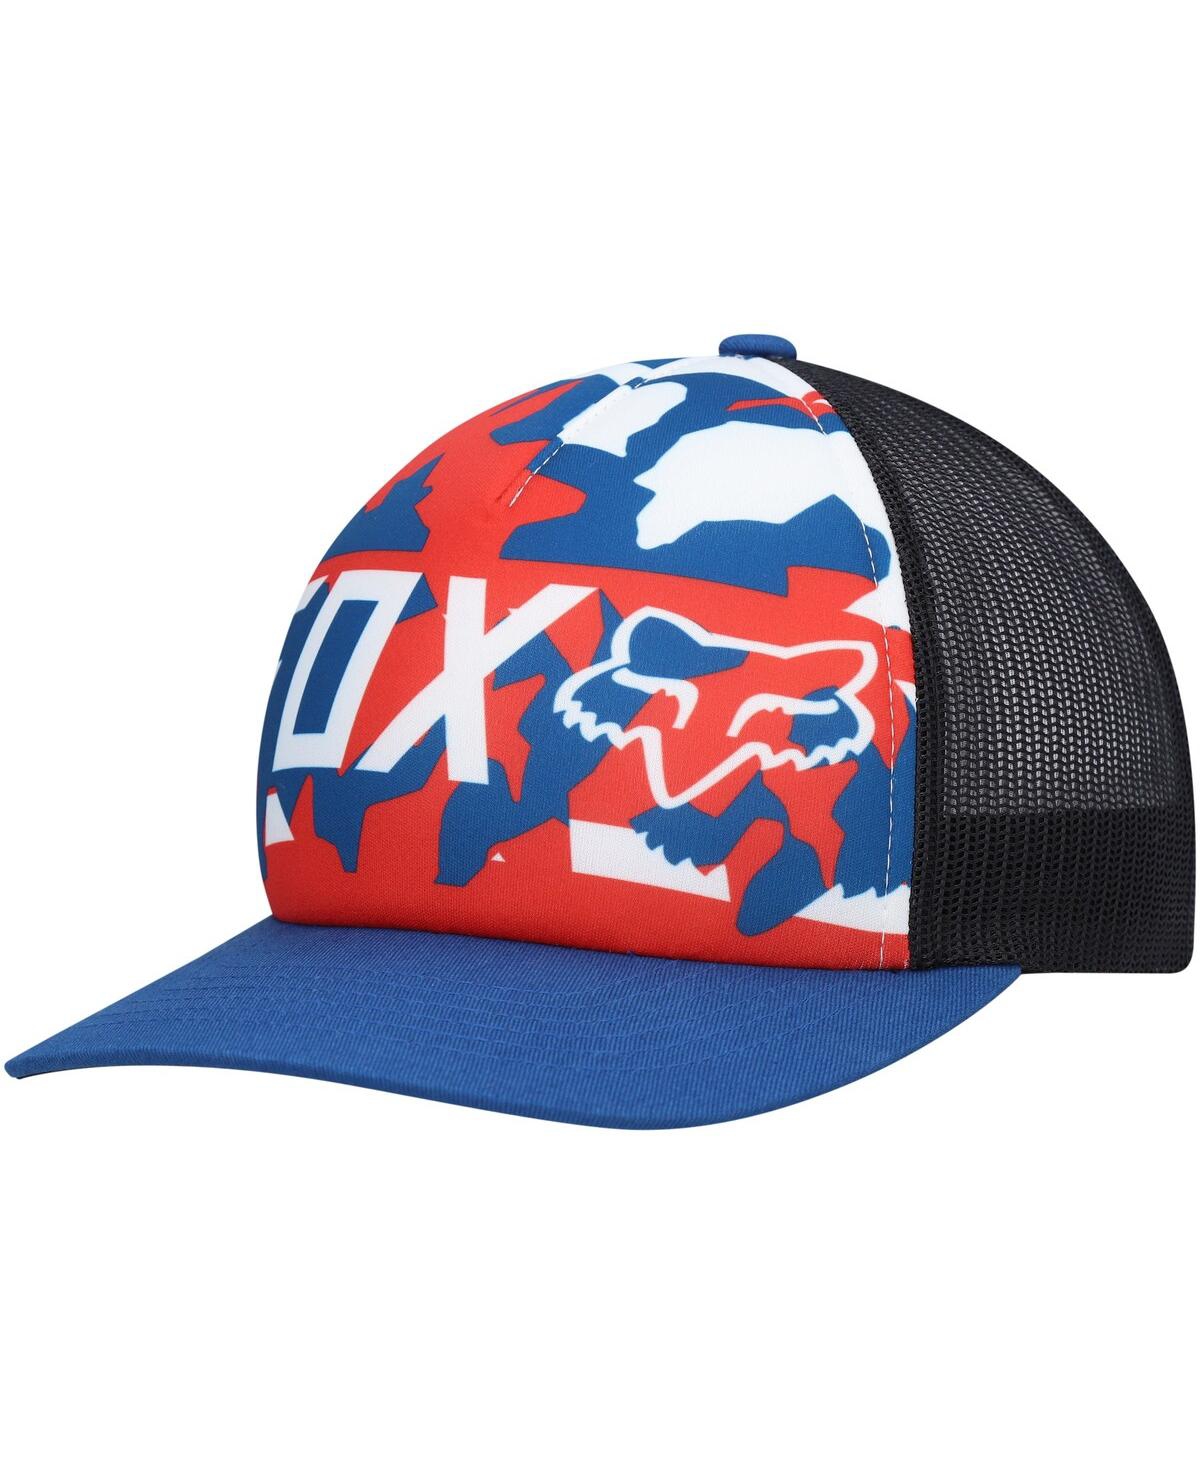 Shop Fox Men's  Royal, Black Red White And True Snapback Hat In Royal,black,red,white